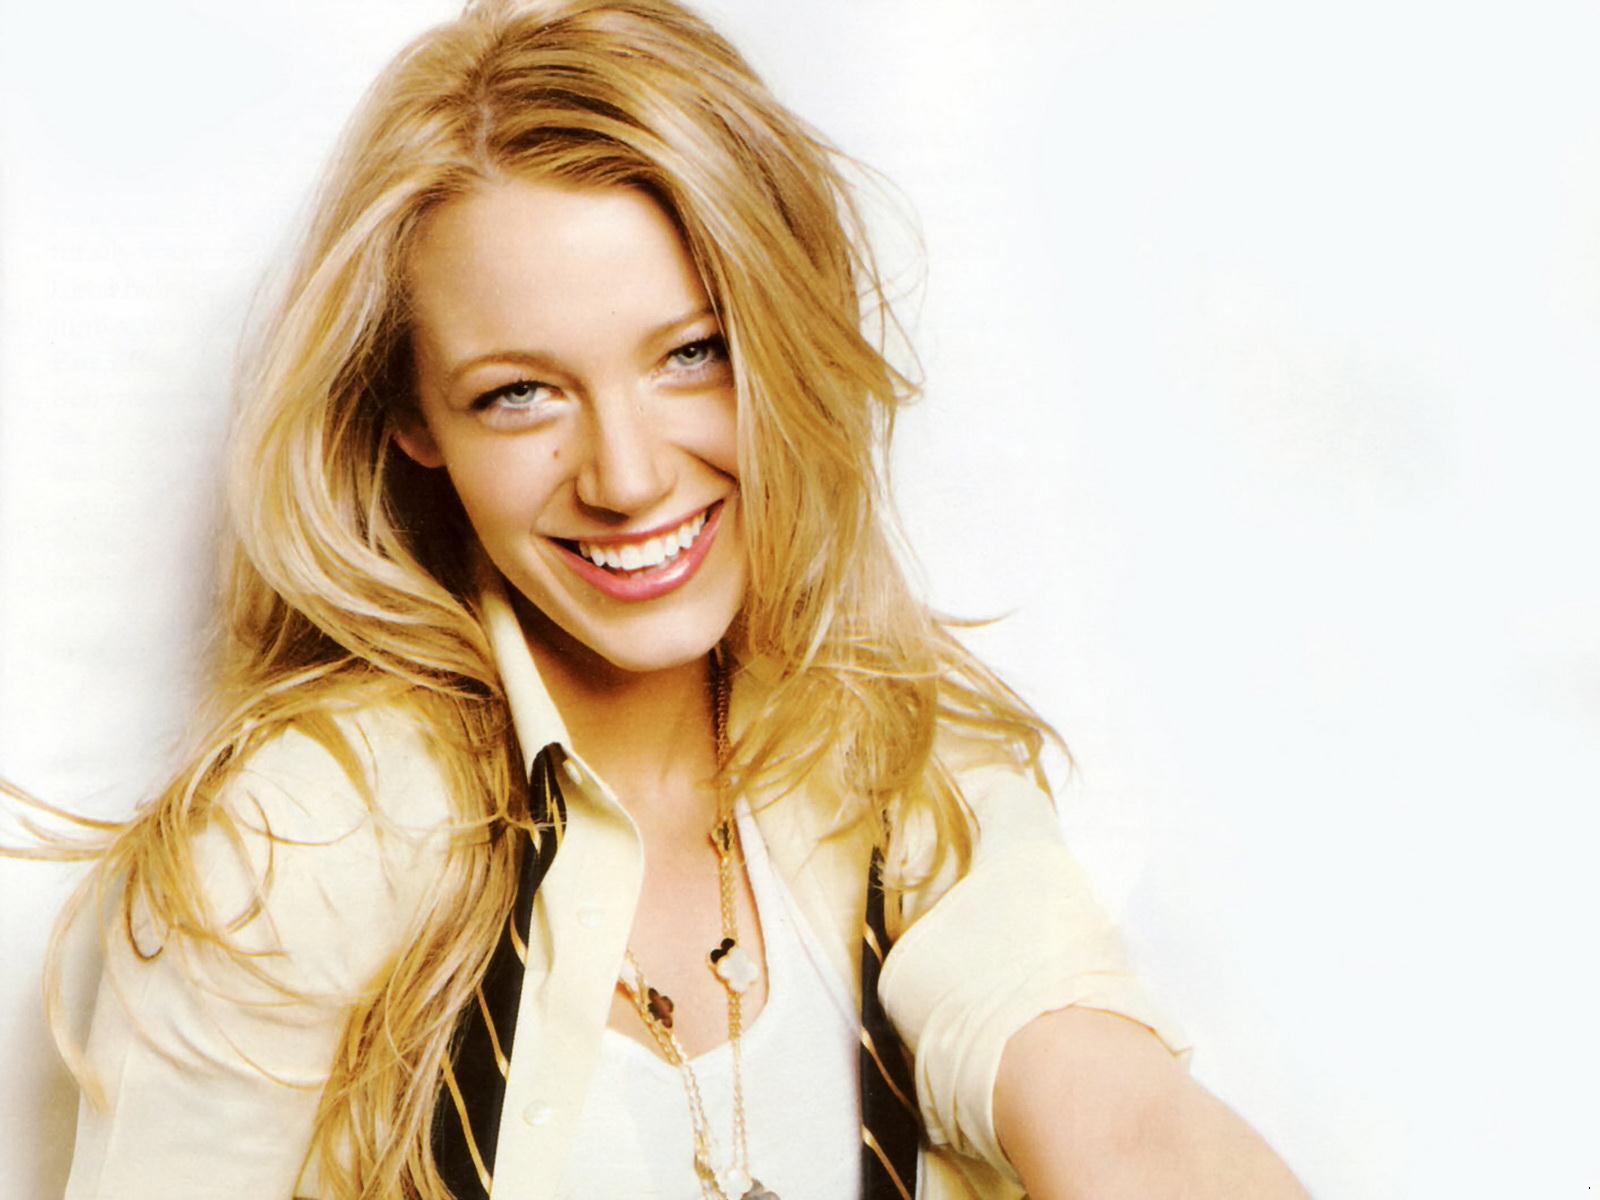 Blake Lively HD Images and Wallpapers - Hollywood Actress